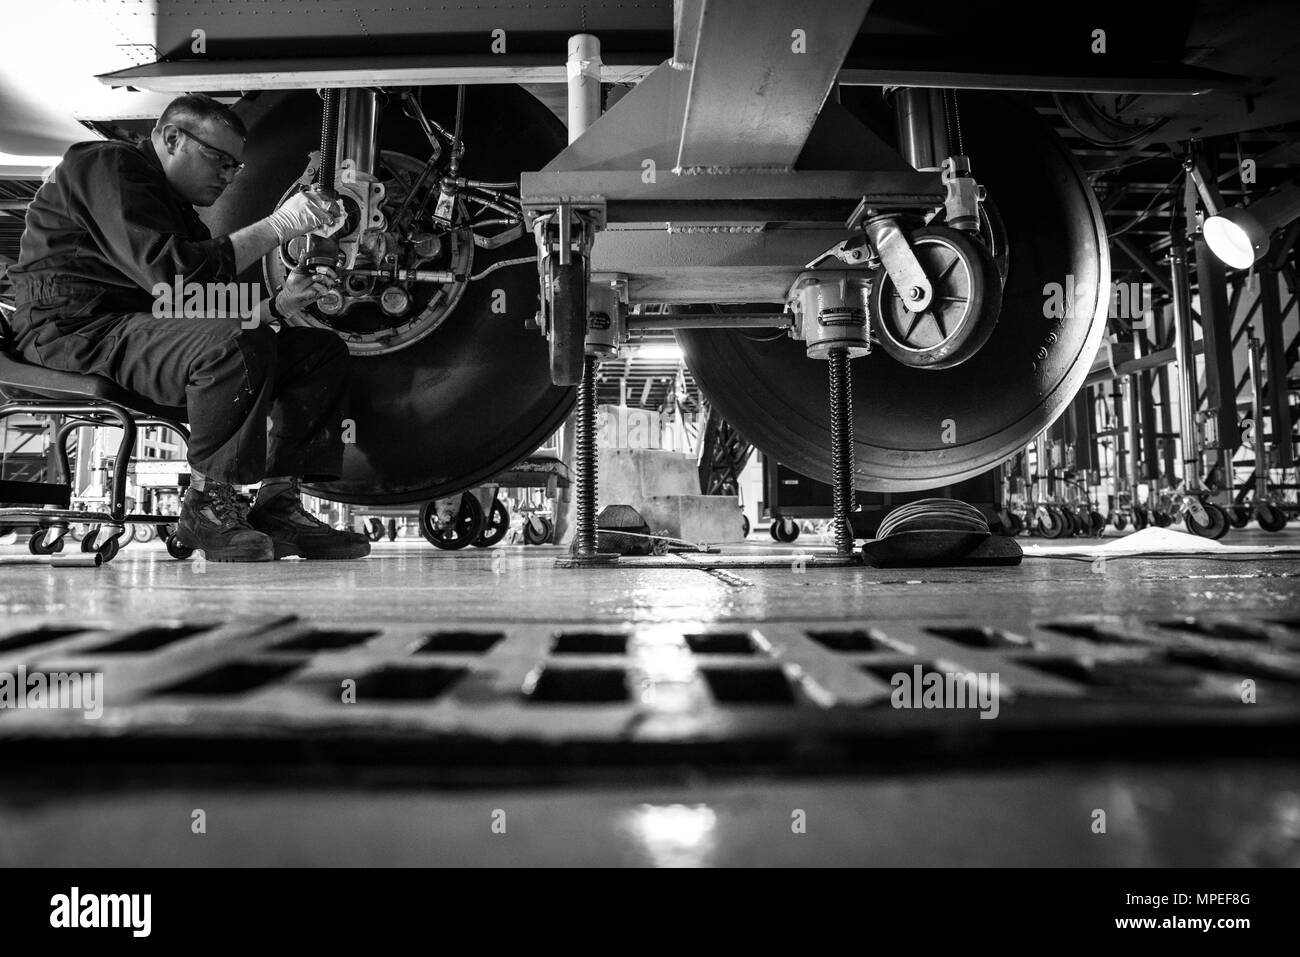 Tech. Sgt. Brandon Reed inspects the landing gear of a C-130H Hercules during an isochronal inspection on Feb. 14, 2017, at the 179th Airlift Wing, Mansfield, Ohio. The 179th Airlift Wing is always on a mission to be the first choice to respond to community, state and federal missions with a trusted team of highly qualified Airmen. (U.S. Air National Guard photo by Tech. Sgt. Joe HarwoodReleased) Stock Photo